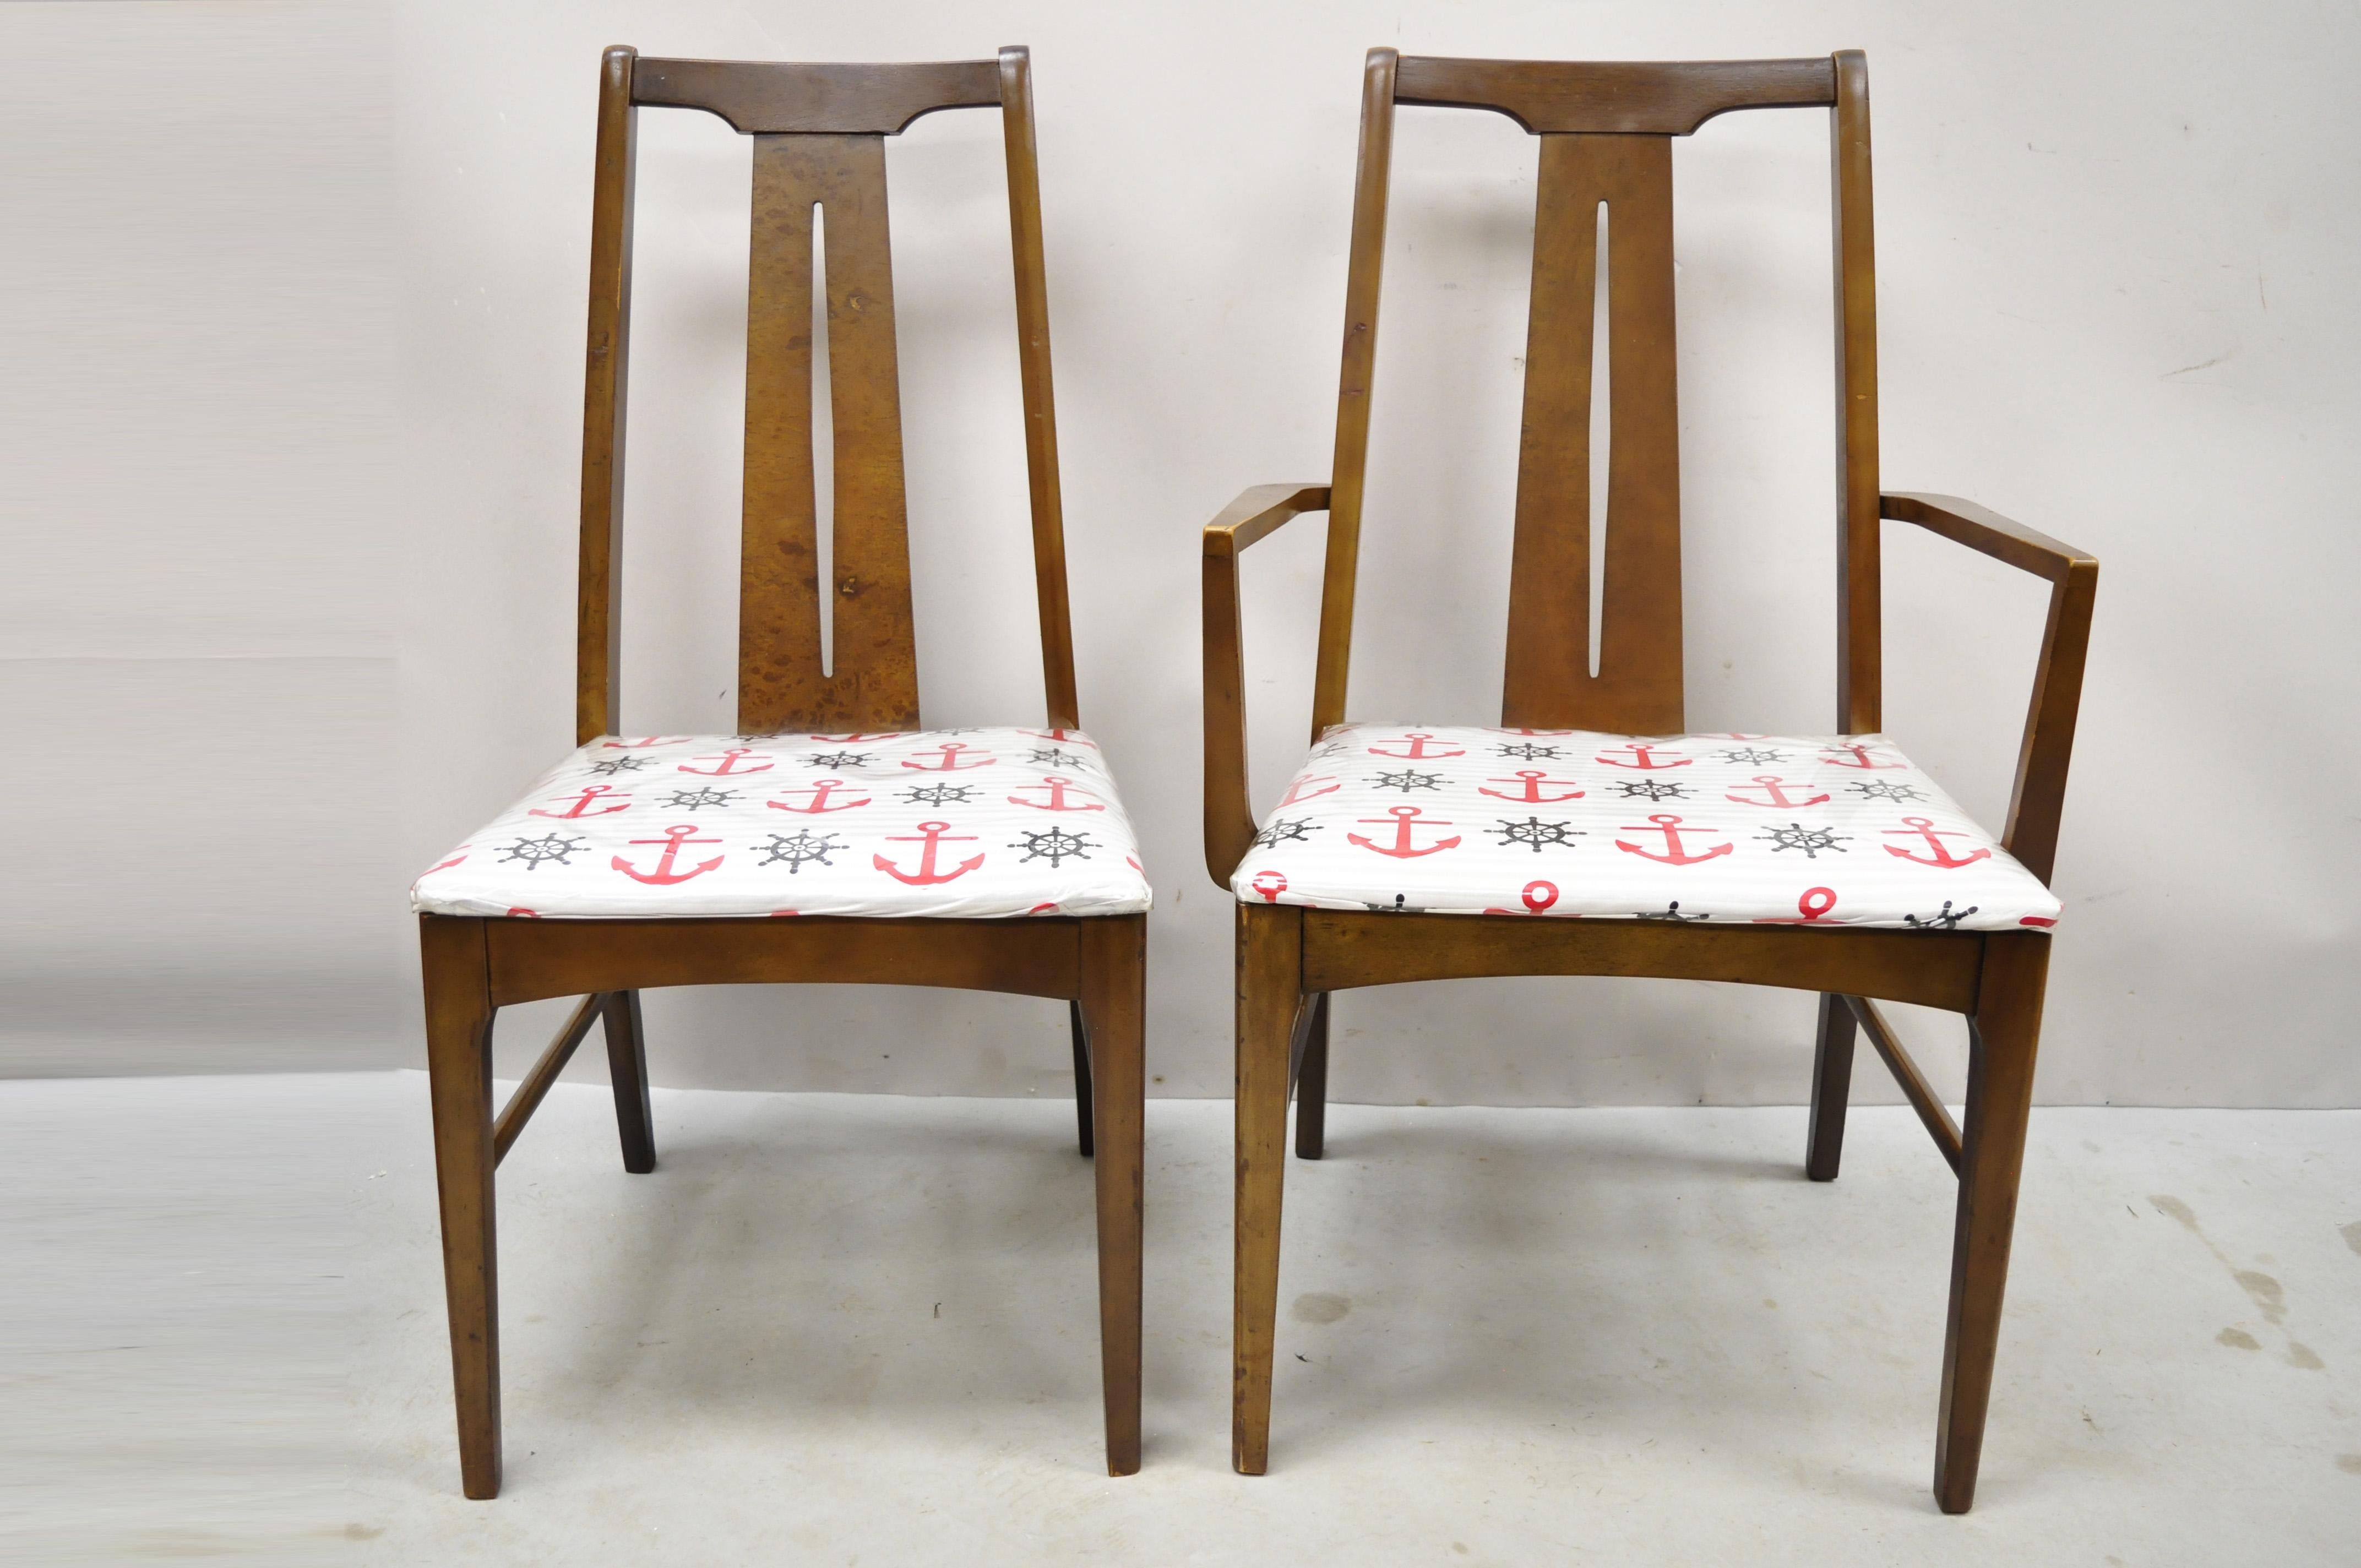 Vintage Mid Century Modern Walnut Dining Room Chairs - Set of 6. Listing includes (2) Arm chairs, (4) side chairs, beautiful wood grain, tapered legs, very nice vintage set, clean modernist lines. Circa Mid 20th Century.
Measurements: 
Arm Chairs: